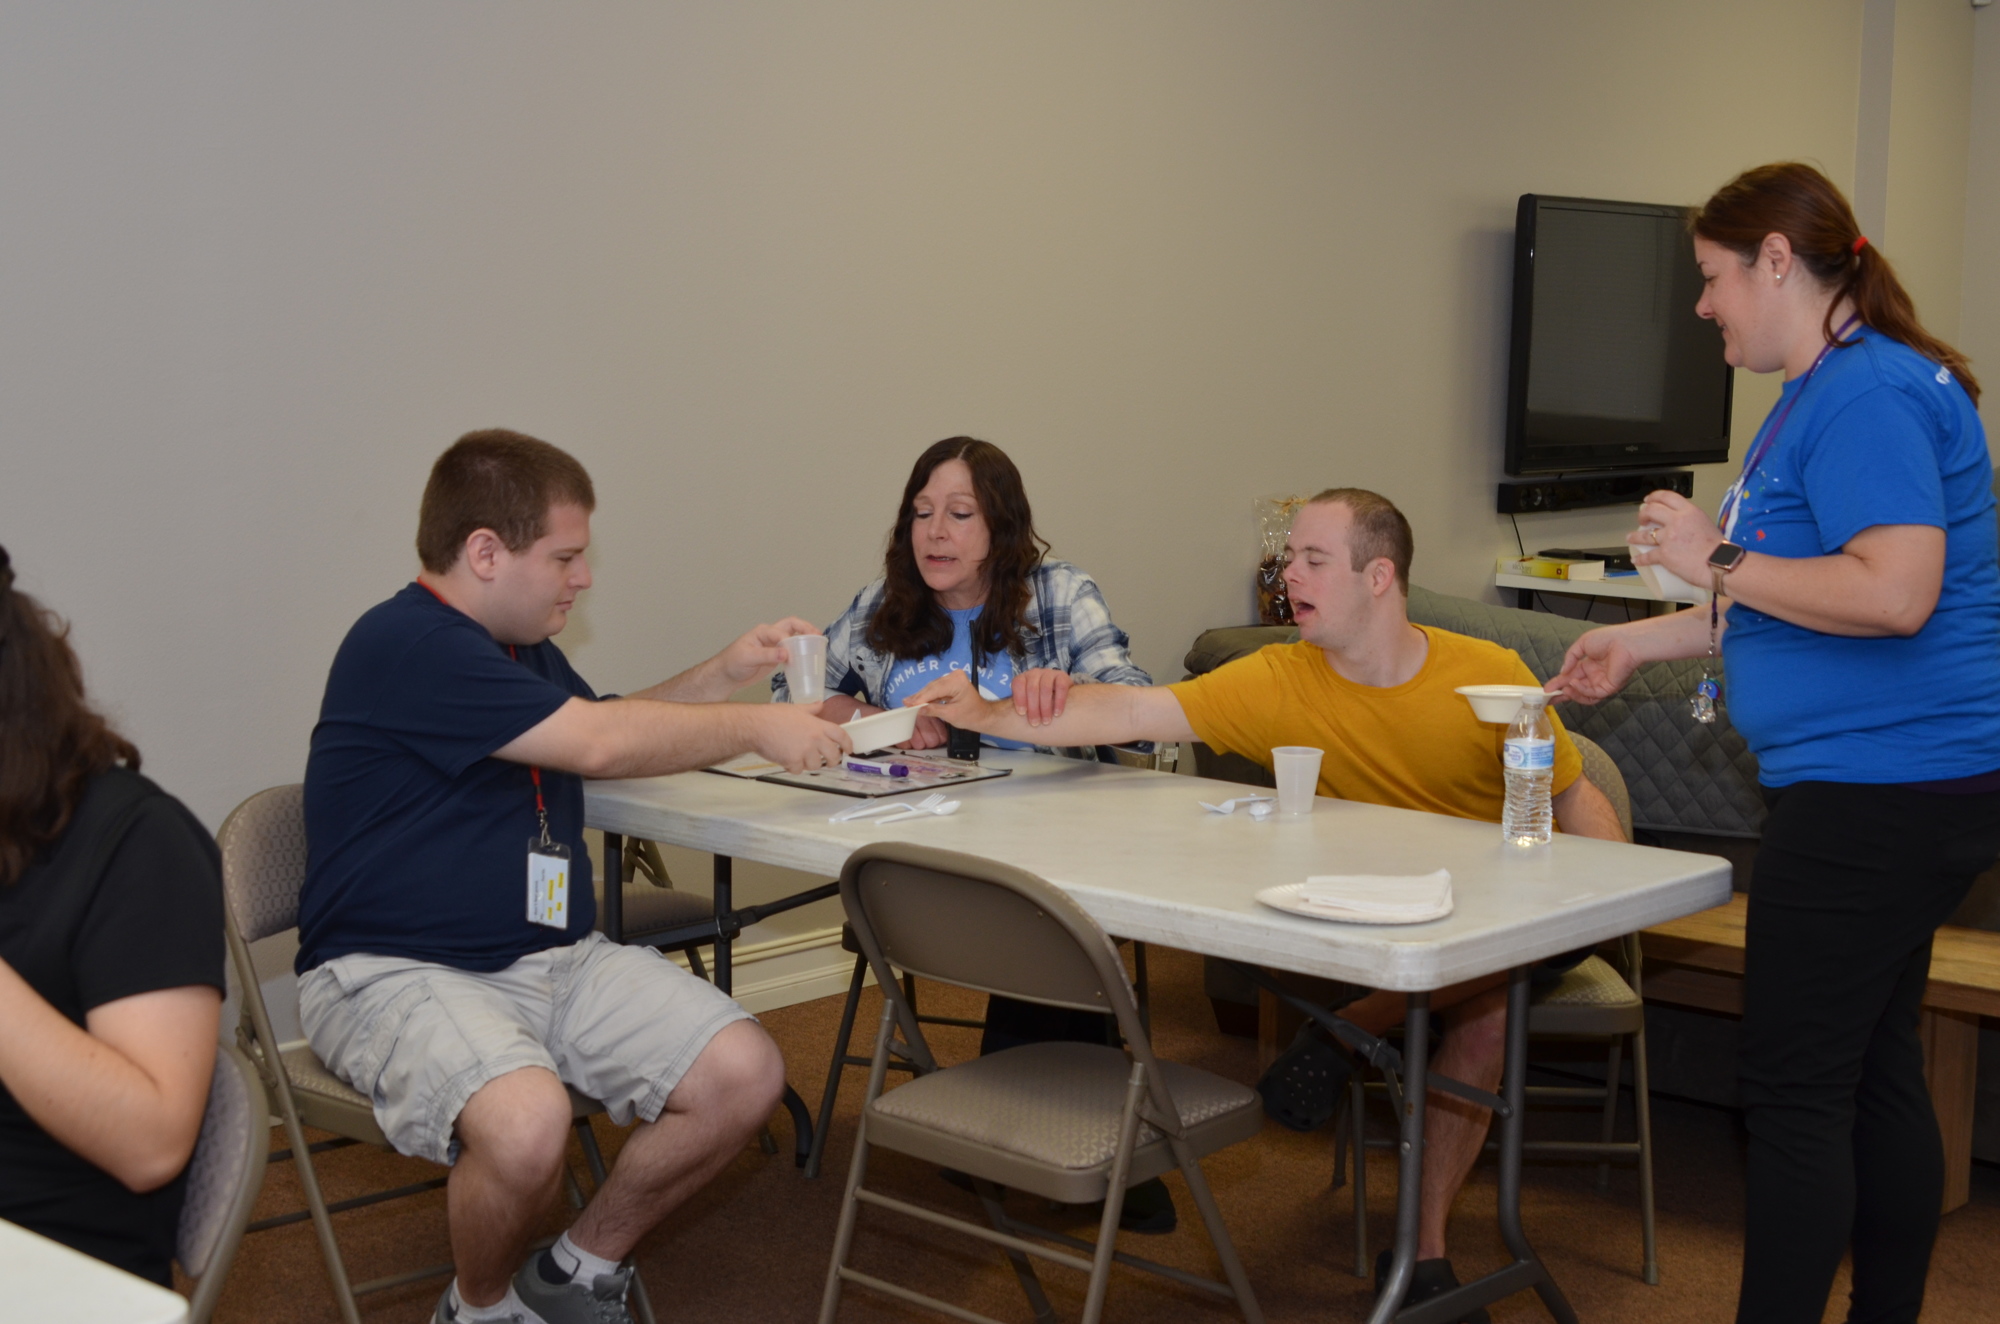 Kelly Calenback, right, and Lisa Earl assist with students Zach Carter, left and Evan Cookson with table-setting instructions.